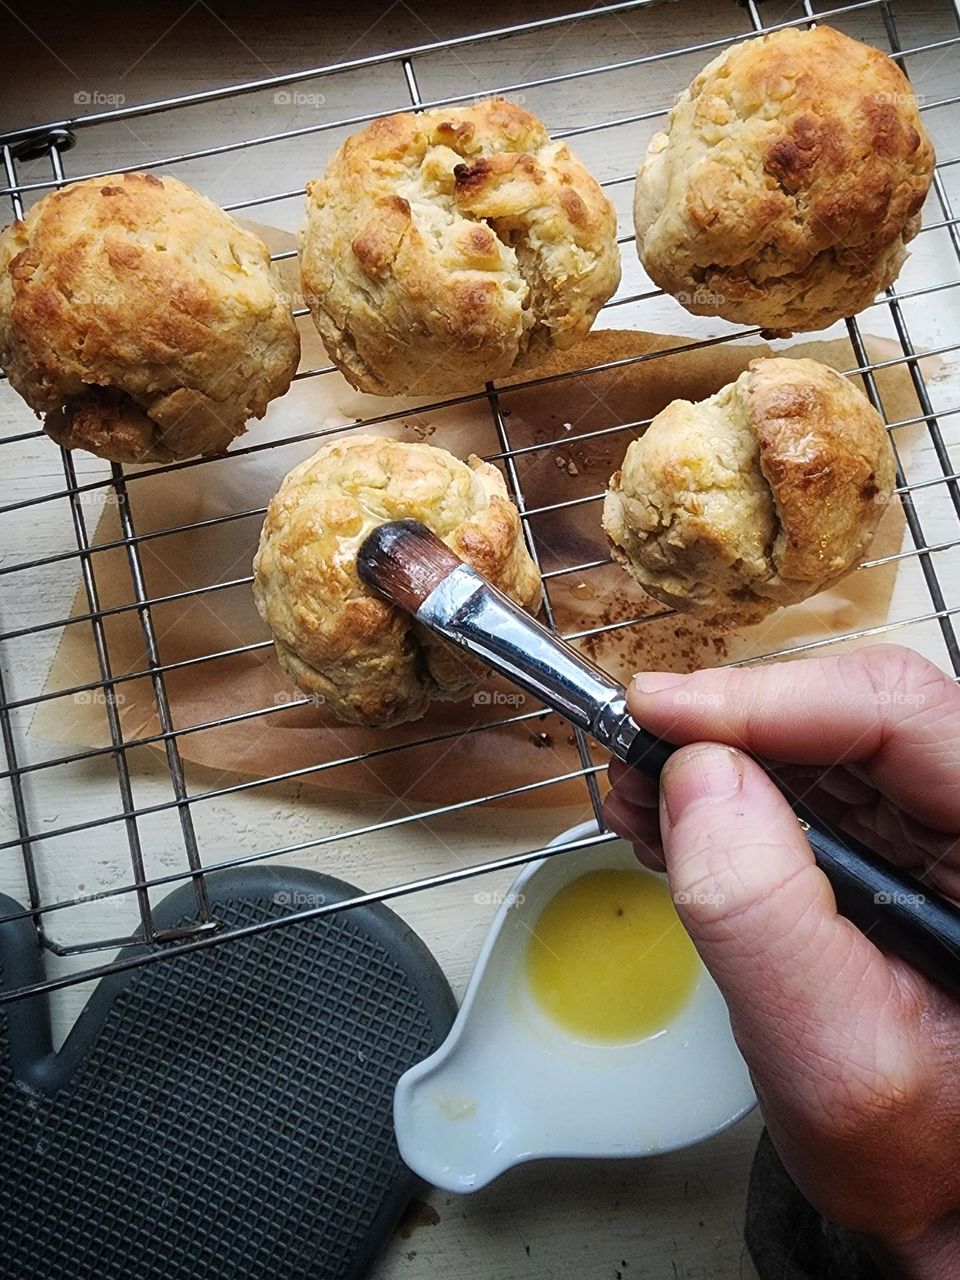 Glazing freshly baked buttermilk biscuits with melted butter.